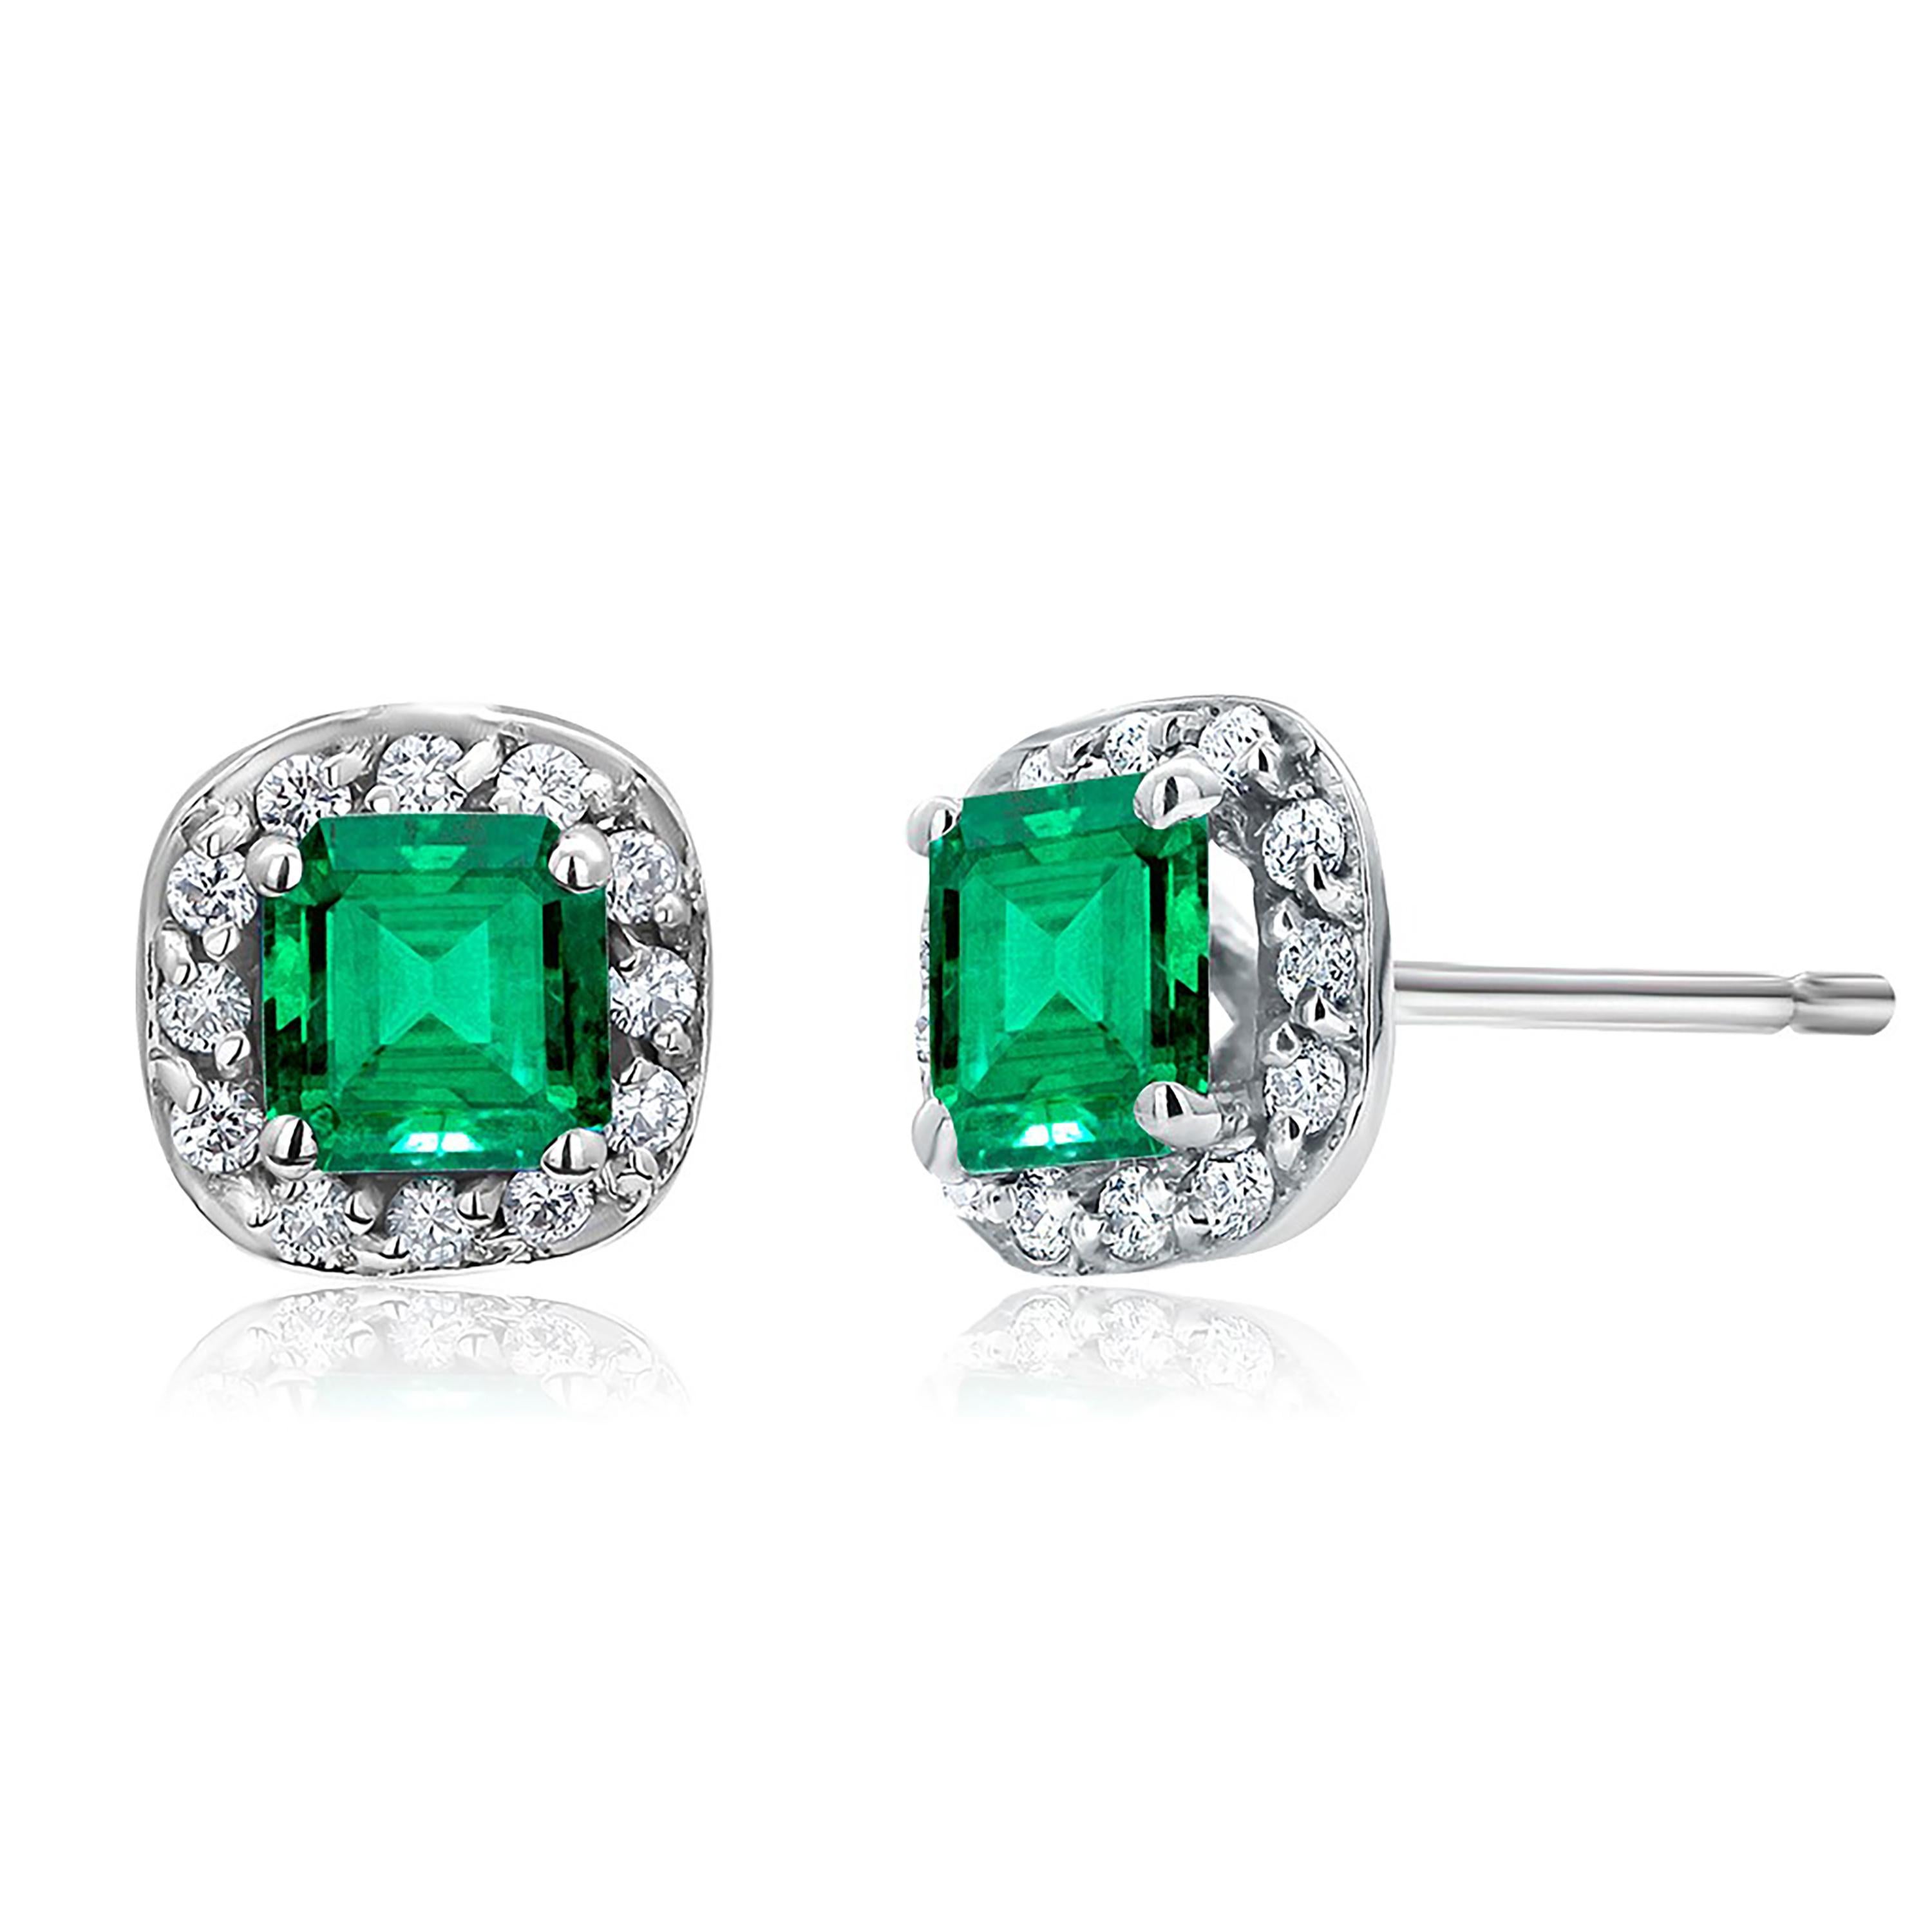 Women's or Men's Emerald Shaped Emerald and Diamond White Gold Square Shaped Stud Earrings